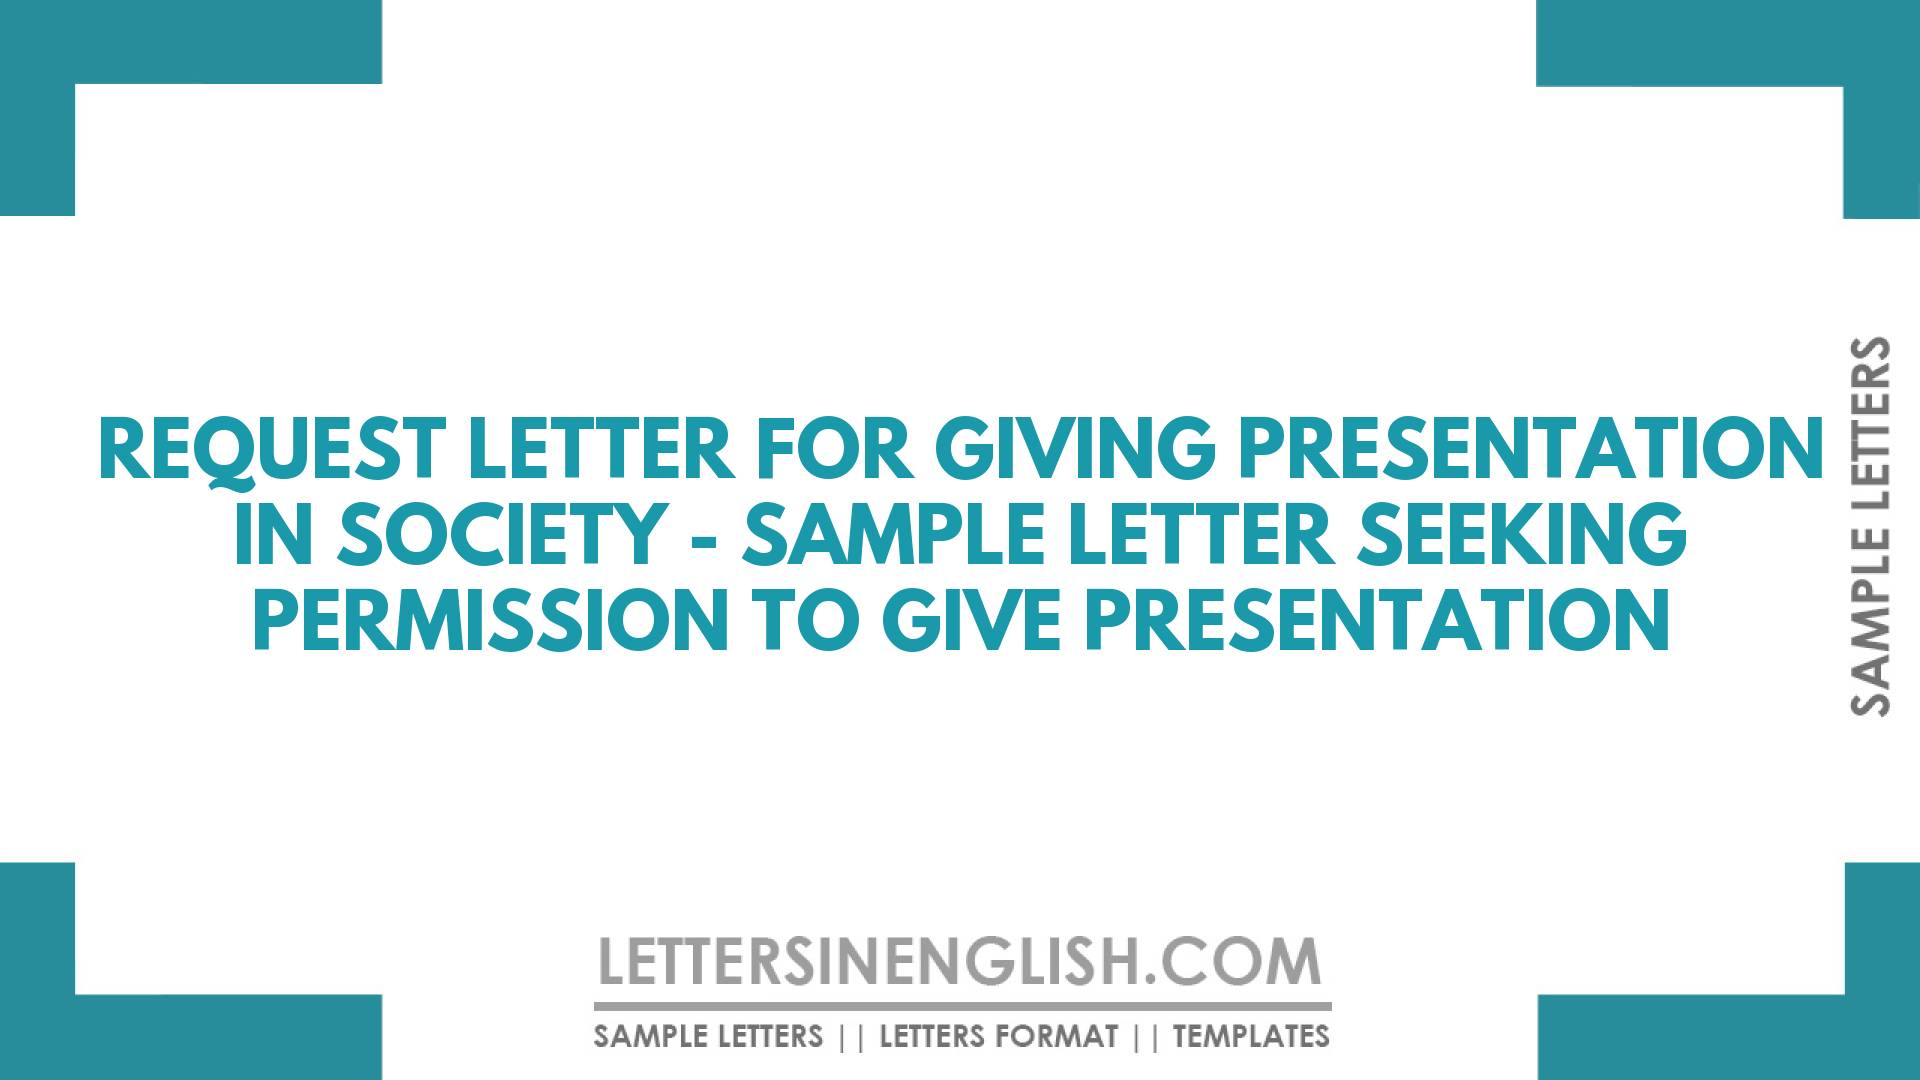 Request Letter for Giving Presentation in Society – Sample Letter Seeking Permission to Give Presentation